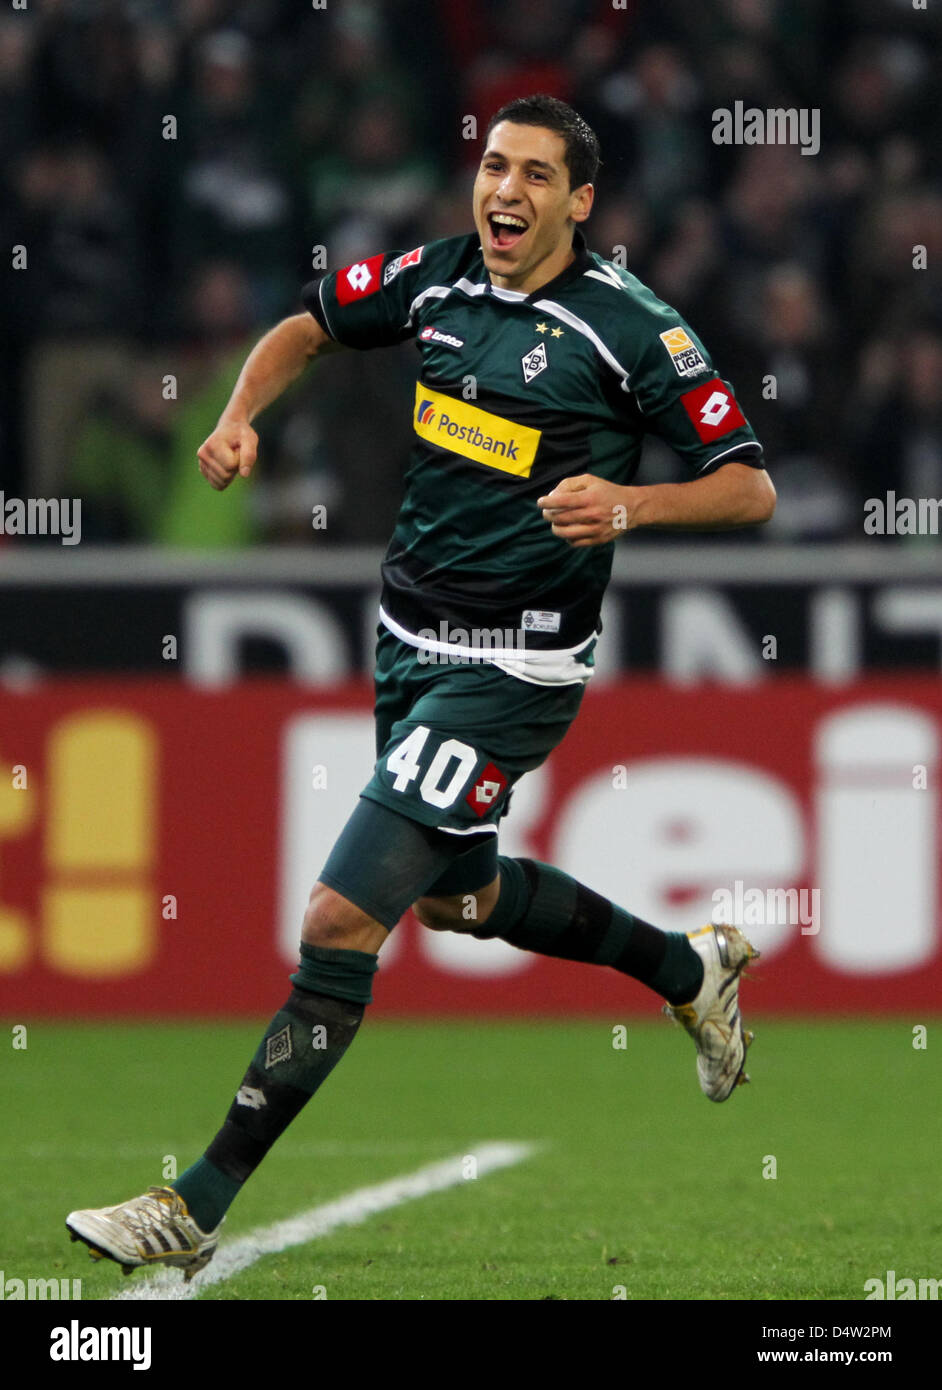 Moenchengladbach's Karim Matmour cheers after Hanover's Constant Djakpa's (not pictured) own goal during the German Bundesliga match Borussia Moenchengladbach vs Hanover 96 at Borussia-Park Stadium in Moenchengladbach, Germany, 12 December 2009. Moenchengladbach won the match 5-3- Photo: ROLF VENNENBERND (ATTENTION: EMBARGO CONDITIONS! The DFL permits the further utilisation of the Stock Photo